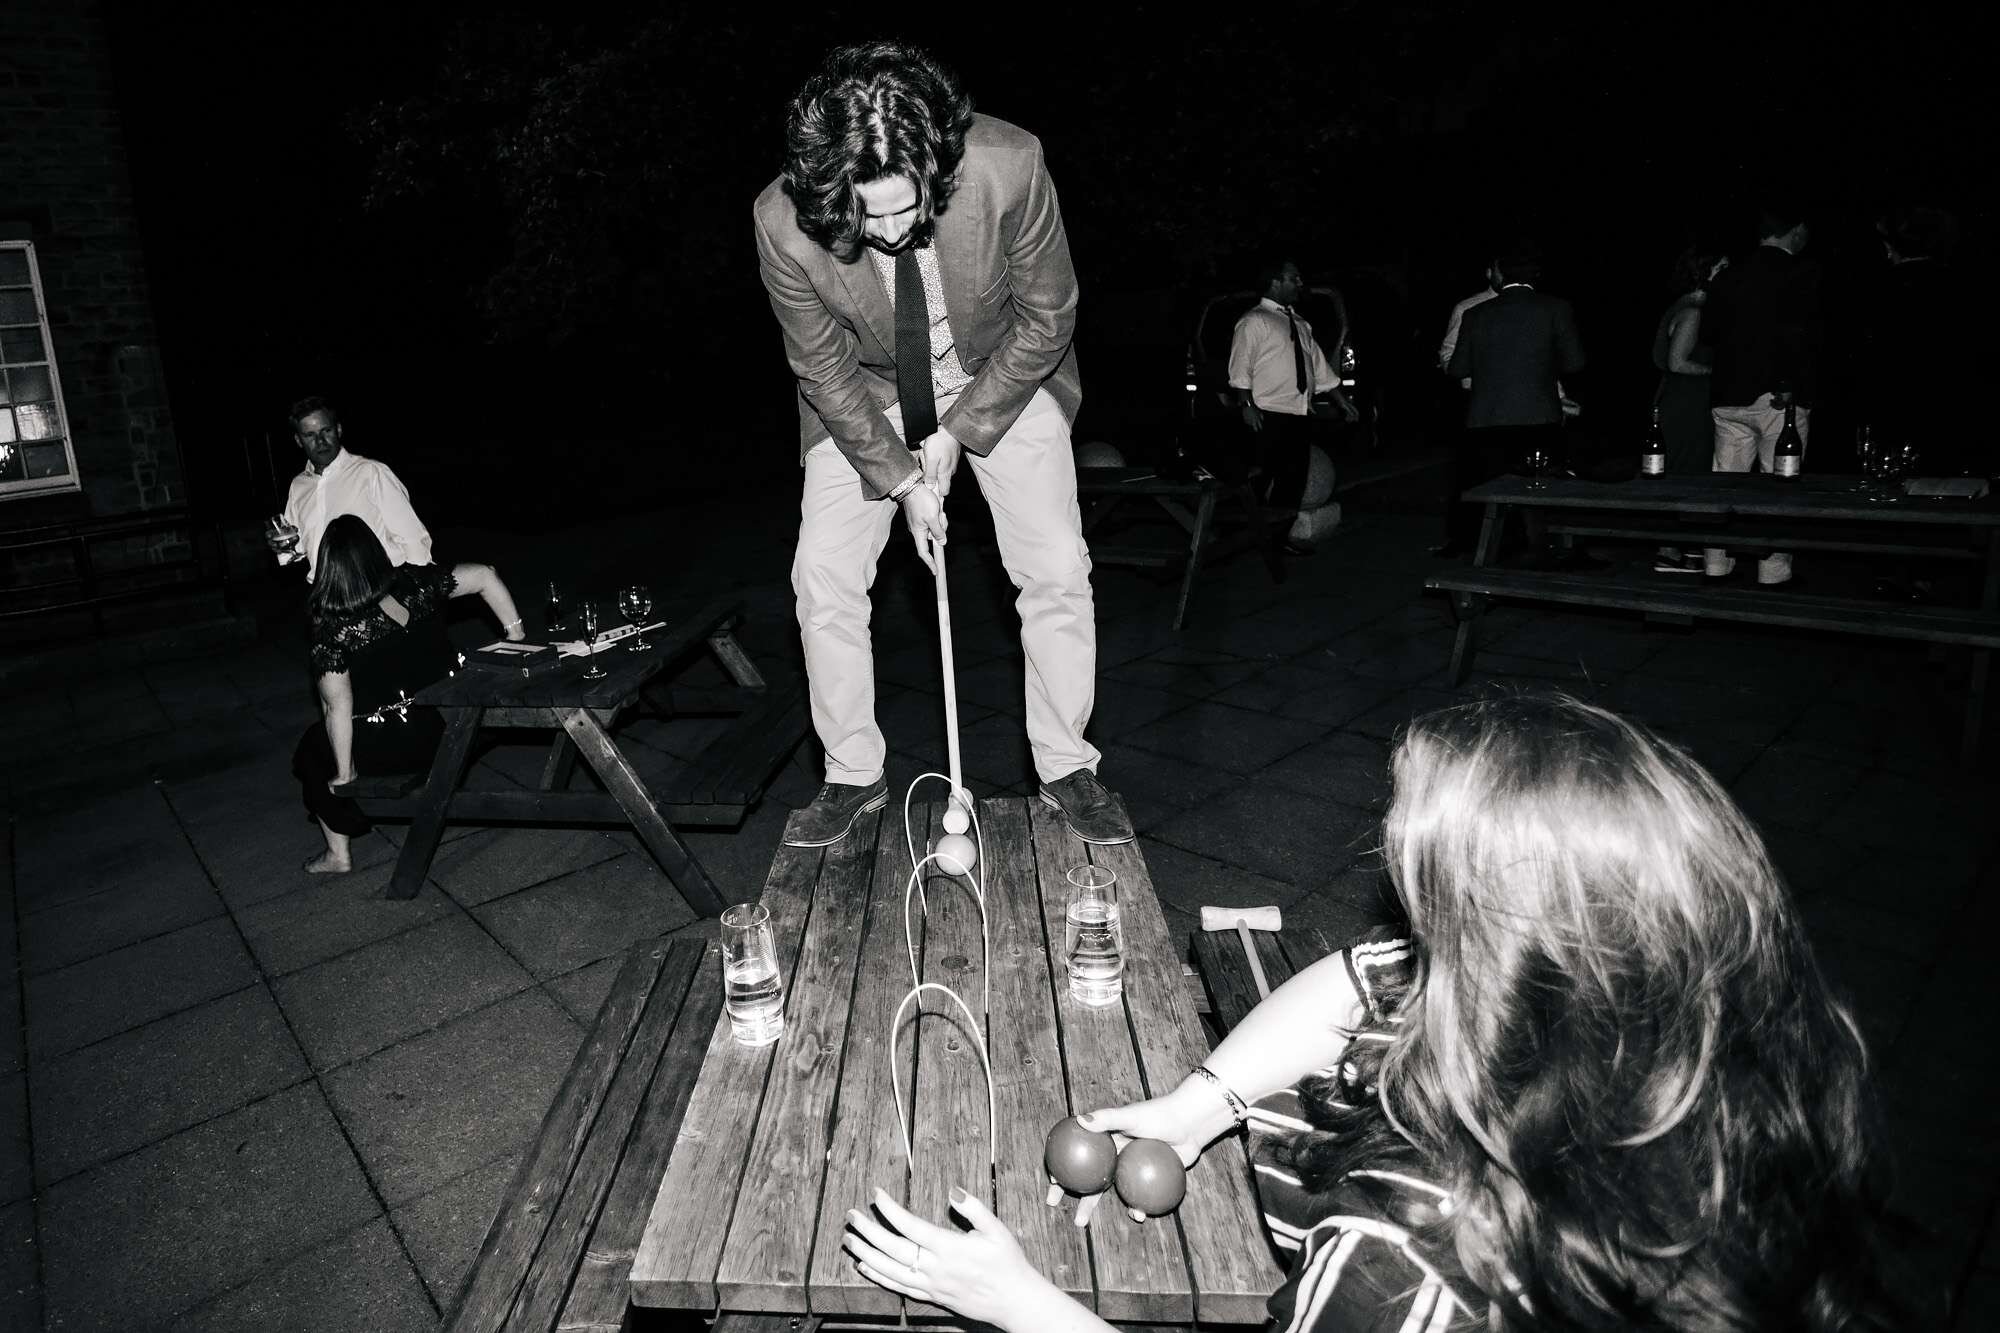 Drunk man at a wedding plays croquet on a picnic table